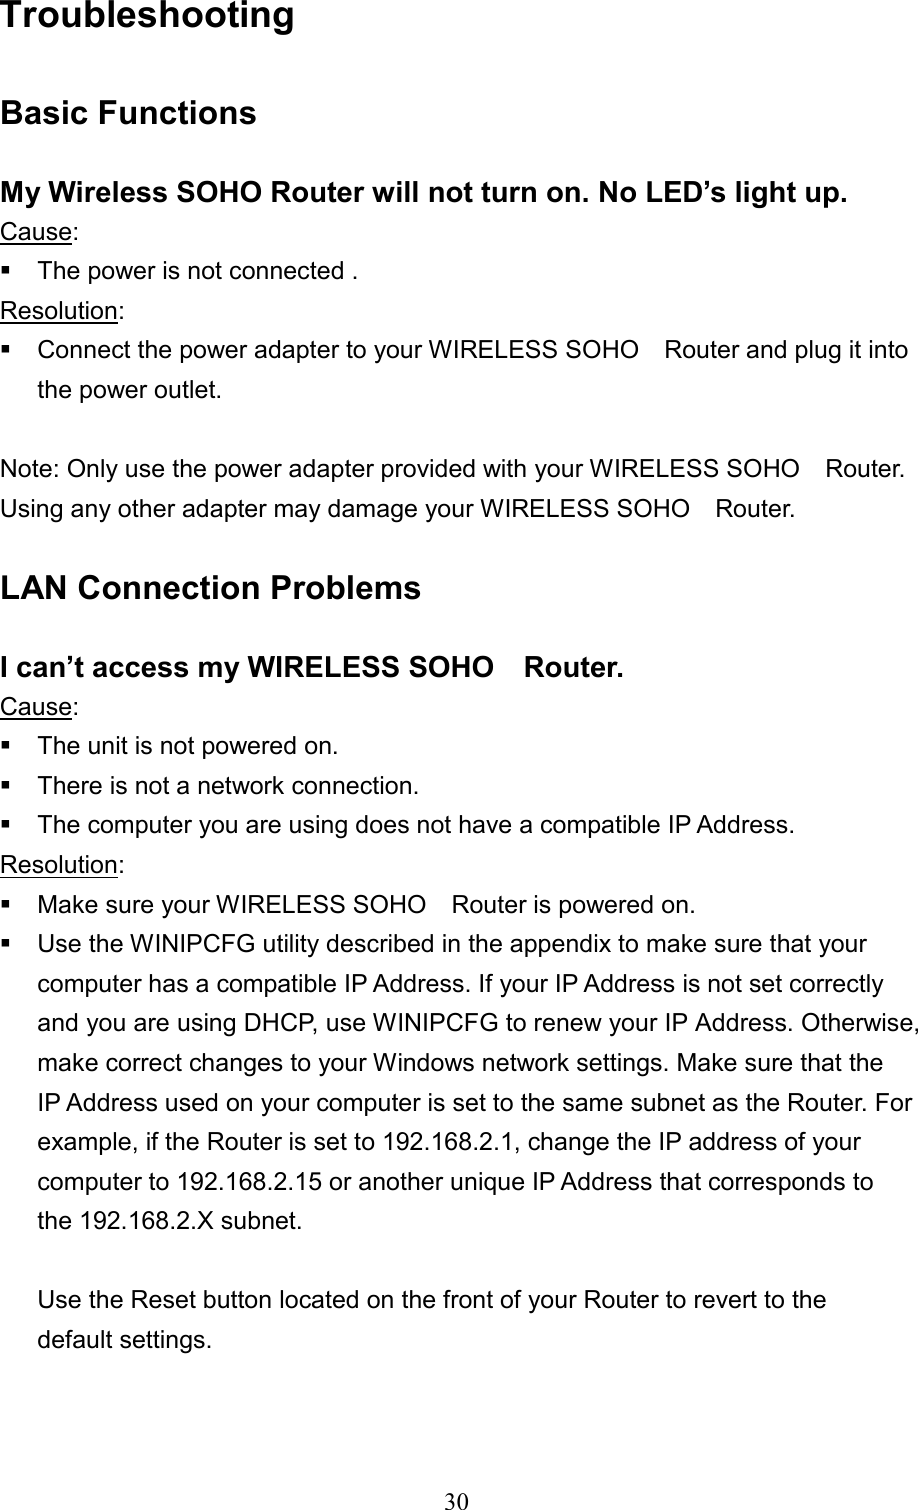  30Troubleshooting   Basic Functions  My Wireless SOHO Router will not turn on. No LED’s light up. Cause:   The power is not connected . Resolution:   Connect the power adapter to your WIRELESS SOHO    Router and plug it into the power outlet.    Note: Only use the power adapter provided with your WIRELESS SOHO    Router. Using any other adapter may damage your WIRELESS SOHO    Router.  LAN Connection Problems  I can’t access my WIRELESS SOHO    Router. Cause:  The unit is not powered on.  There is not a network connection.  The computer you are using does not have a compatible IP Address. Resolution:  Make sure your WIRELESS SOHO    Router is powered on.  Use the WINIPCFG utility described in the appendix to make sure that your computer has a compatible IP Address. If your IP Address is not set correctly and you are using DHCP, use WINIPCFG to renew your IP Address. Otherwise, make correct changes to your Windows network settings. Make sure that the IP Address used on your computer is set to the same subnet as the Router. For example, if the Router is set to 192.168.2.1, change the IP address of your computer to 192.168.2.15 or another unique IP Address that corresponds to the 192.168.2.X subnet.        Use the Reset button located on the front of your Router to revert to the        default settings.    